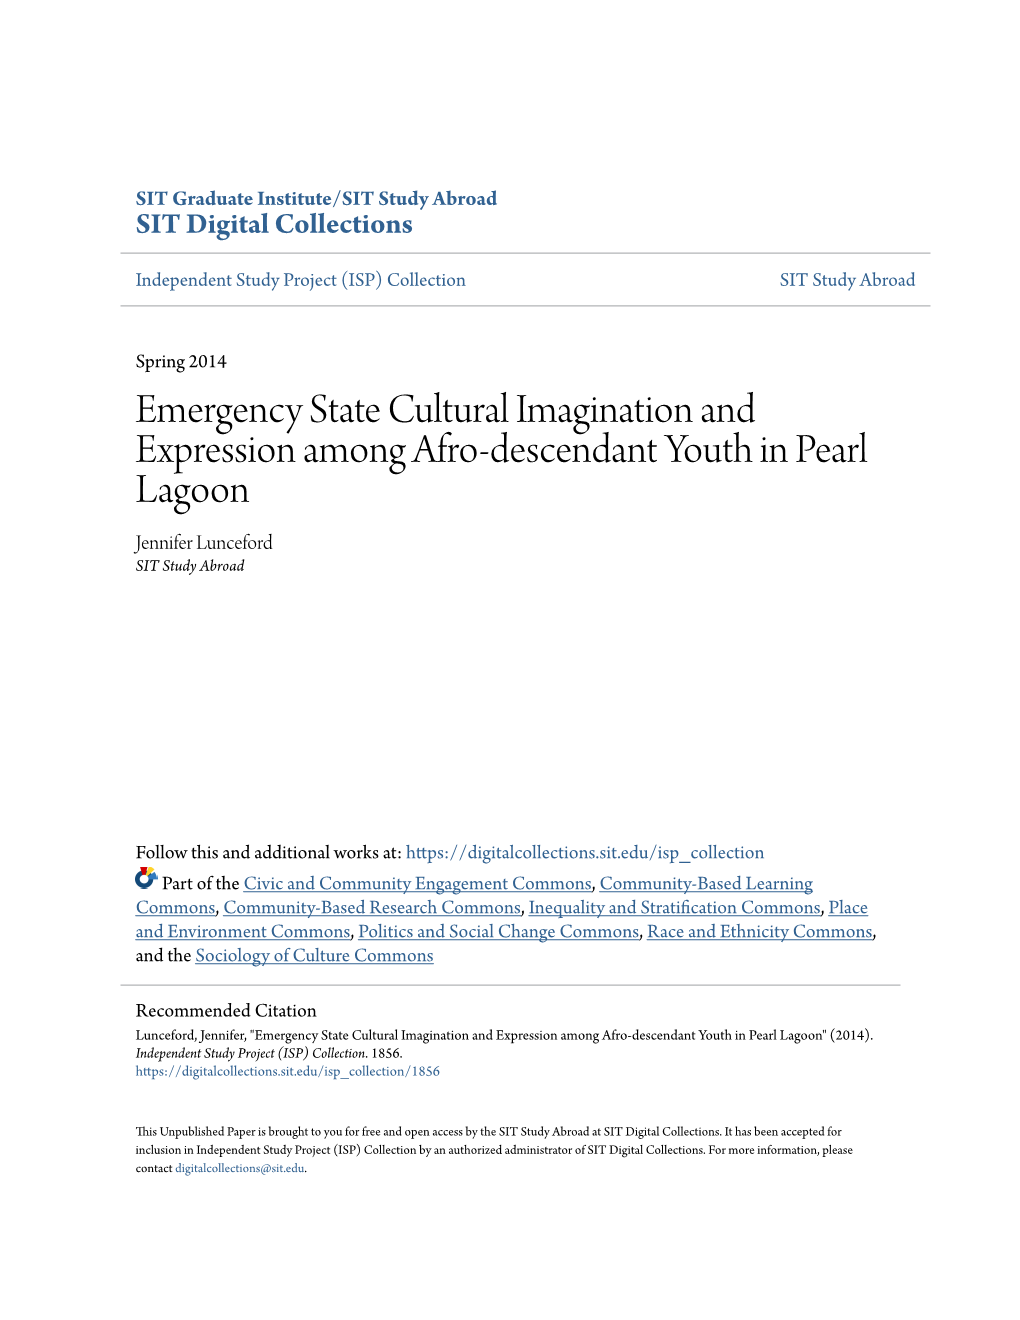 Emergency State Cultural Imagination and Expression Among Afro-Descendant Youth in Pearl Lagoon Jennifer Lunceford SIT Study Abroad